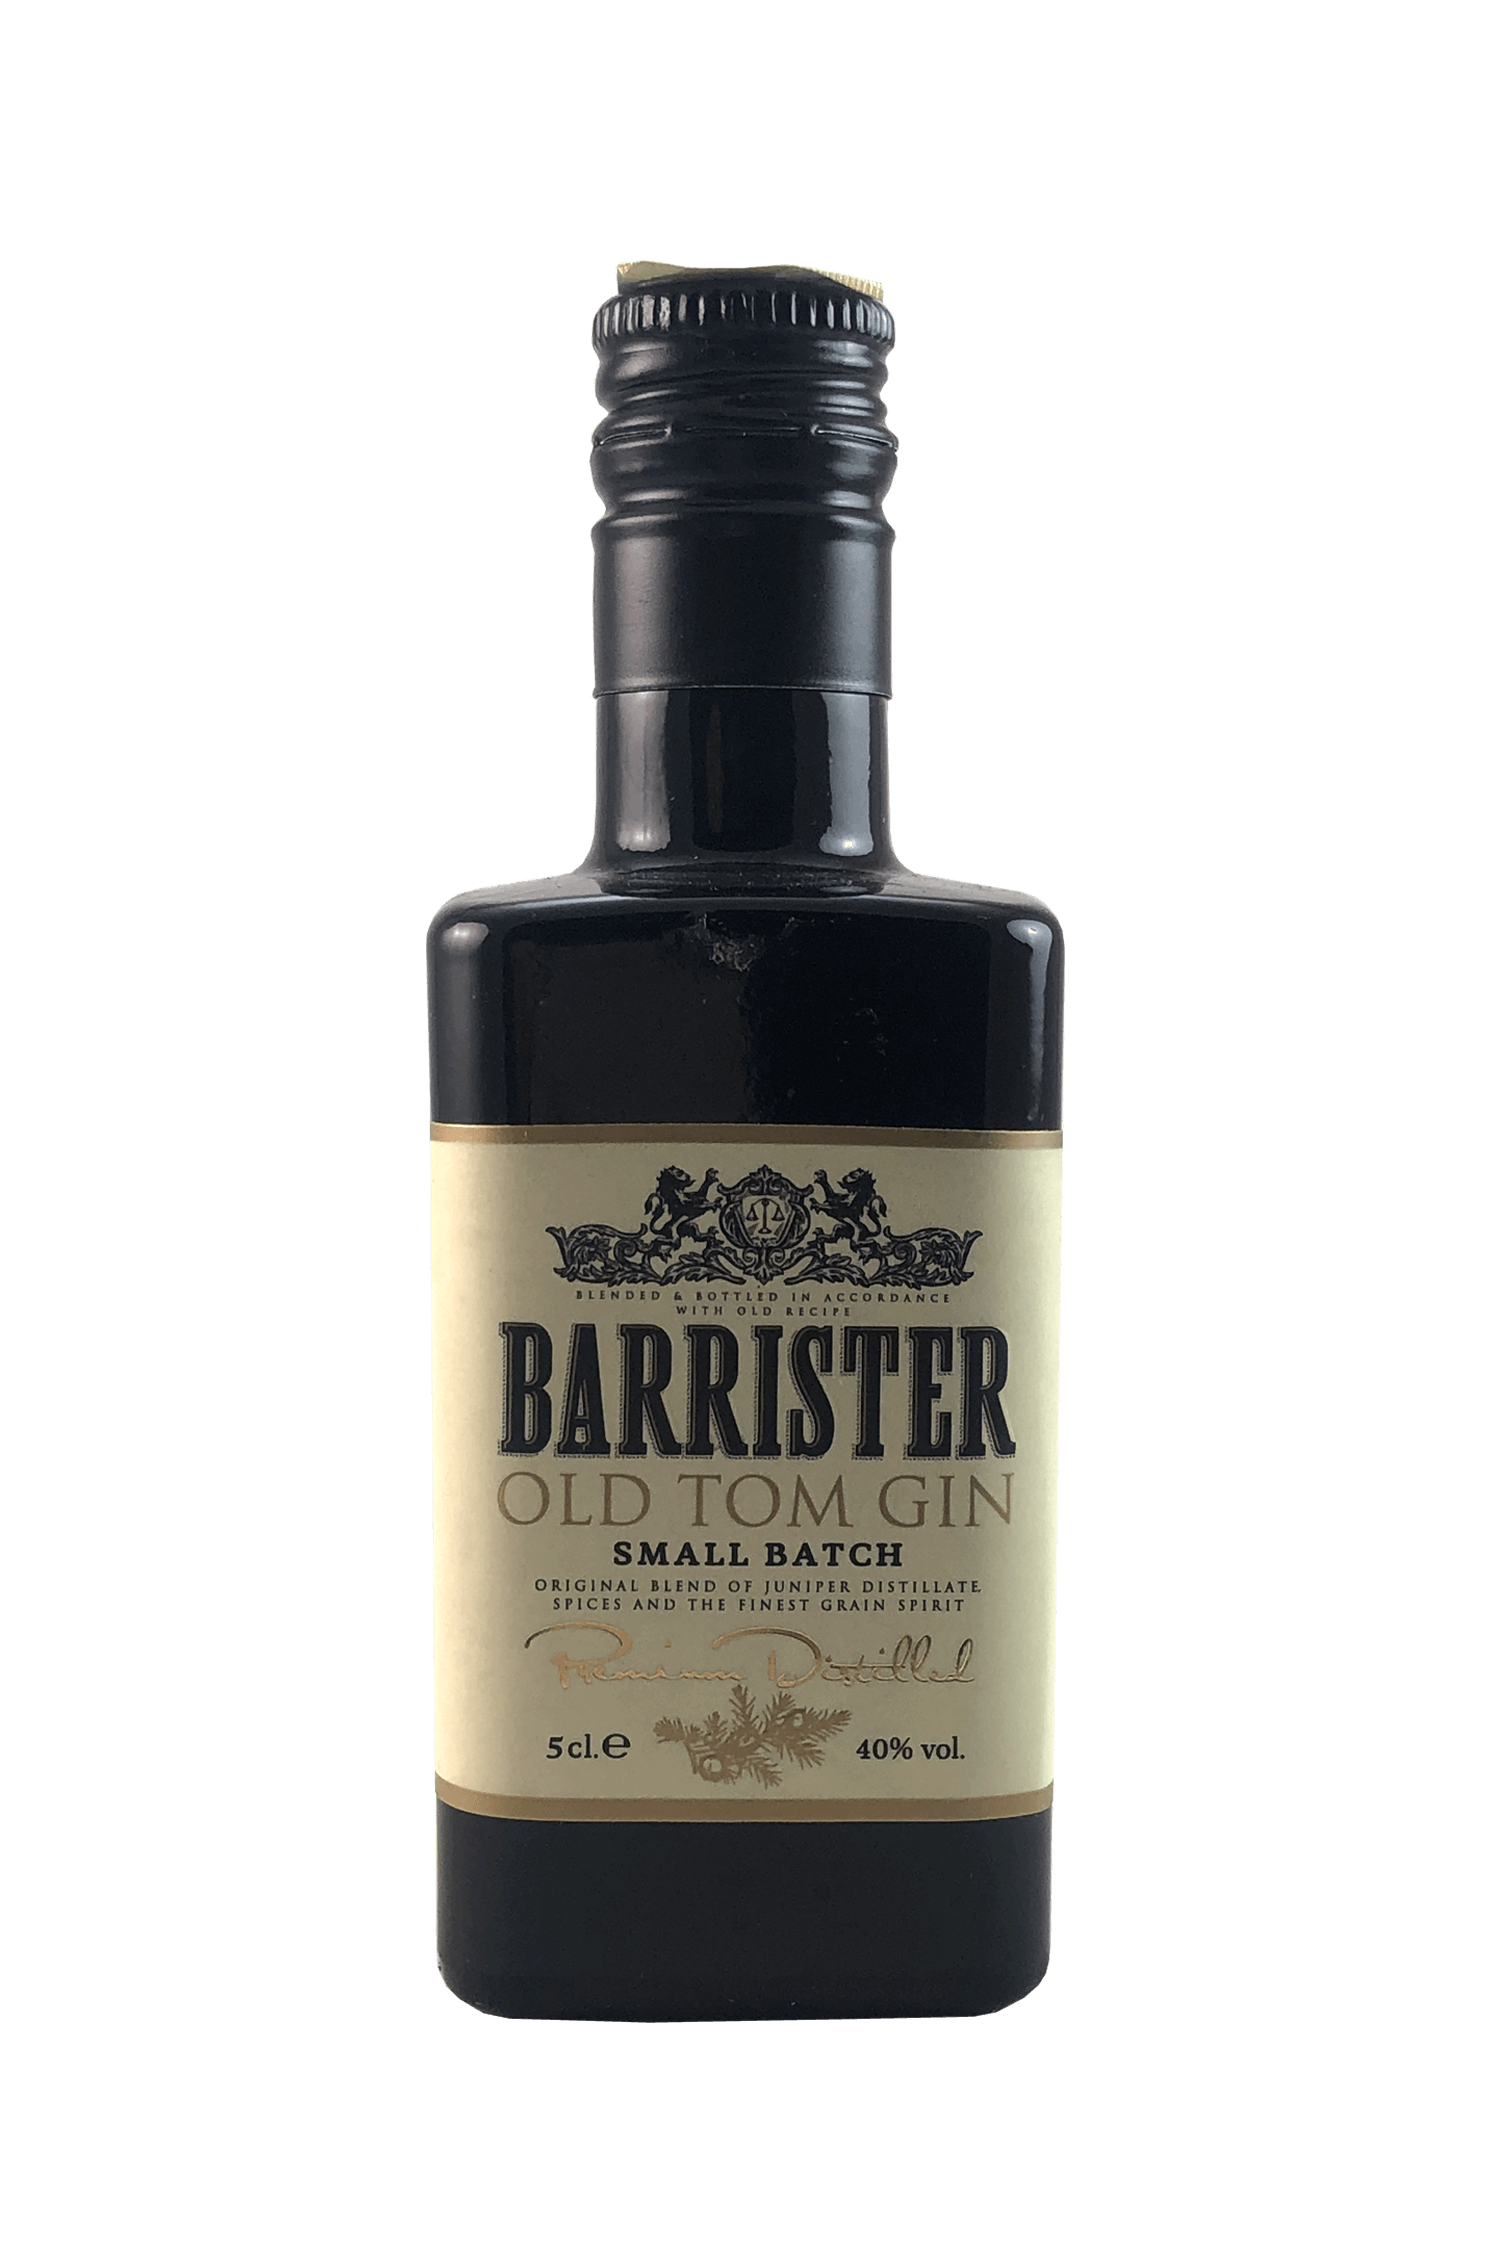 Barrister Old Tom Gin